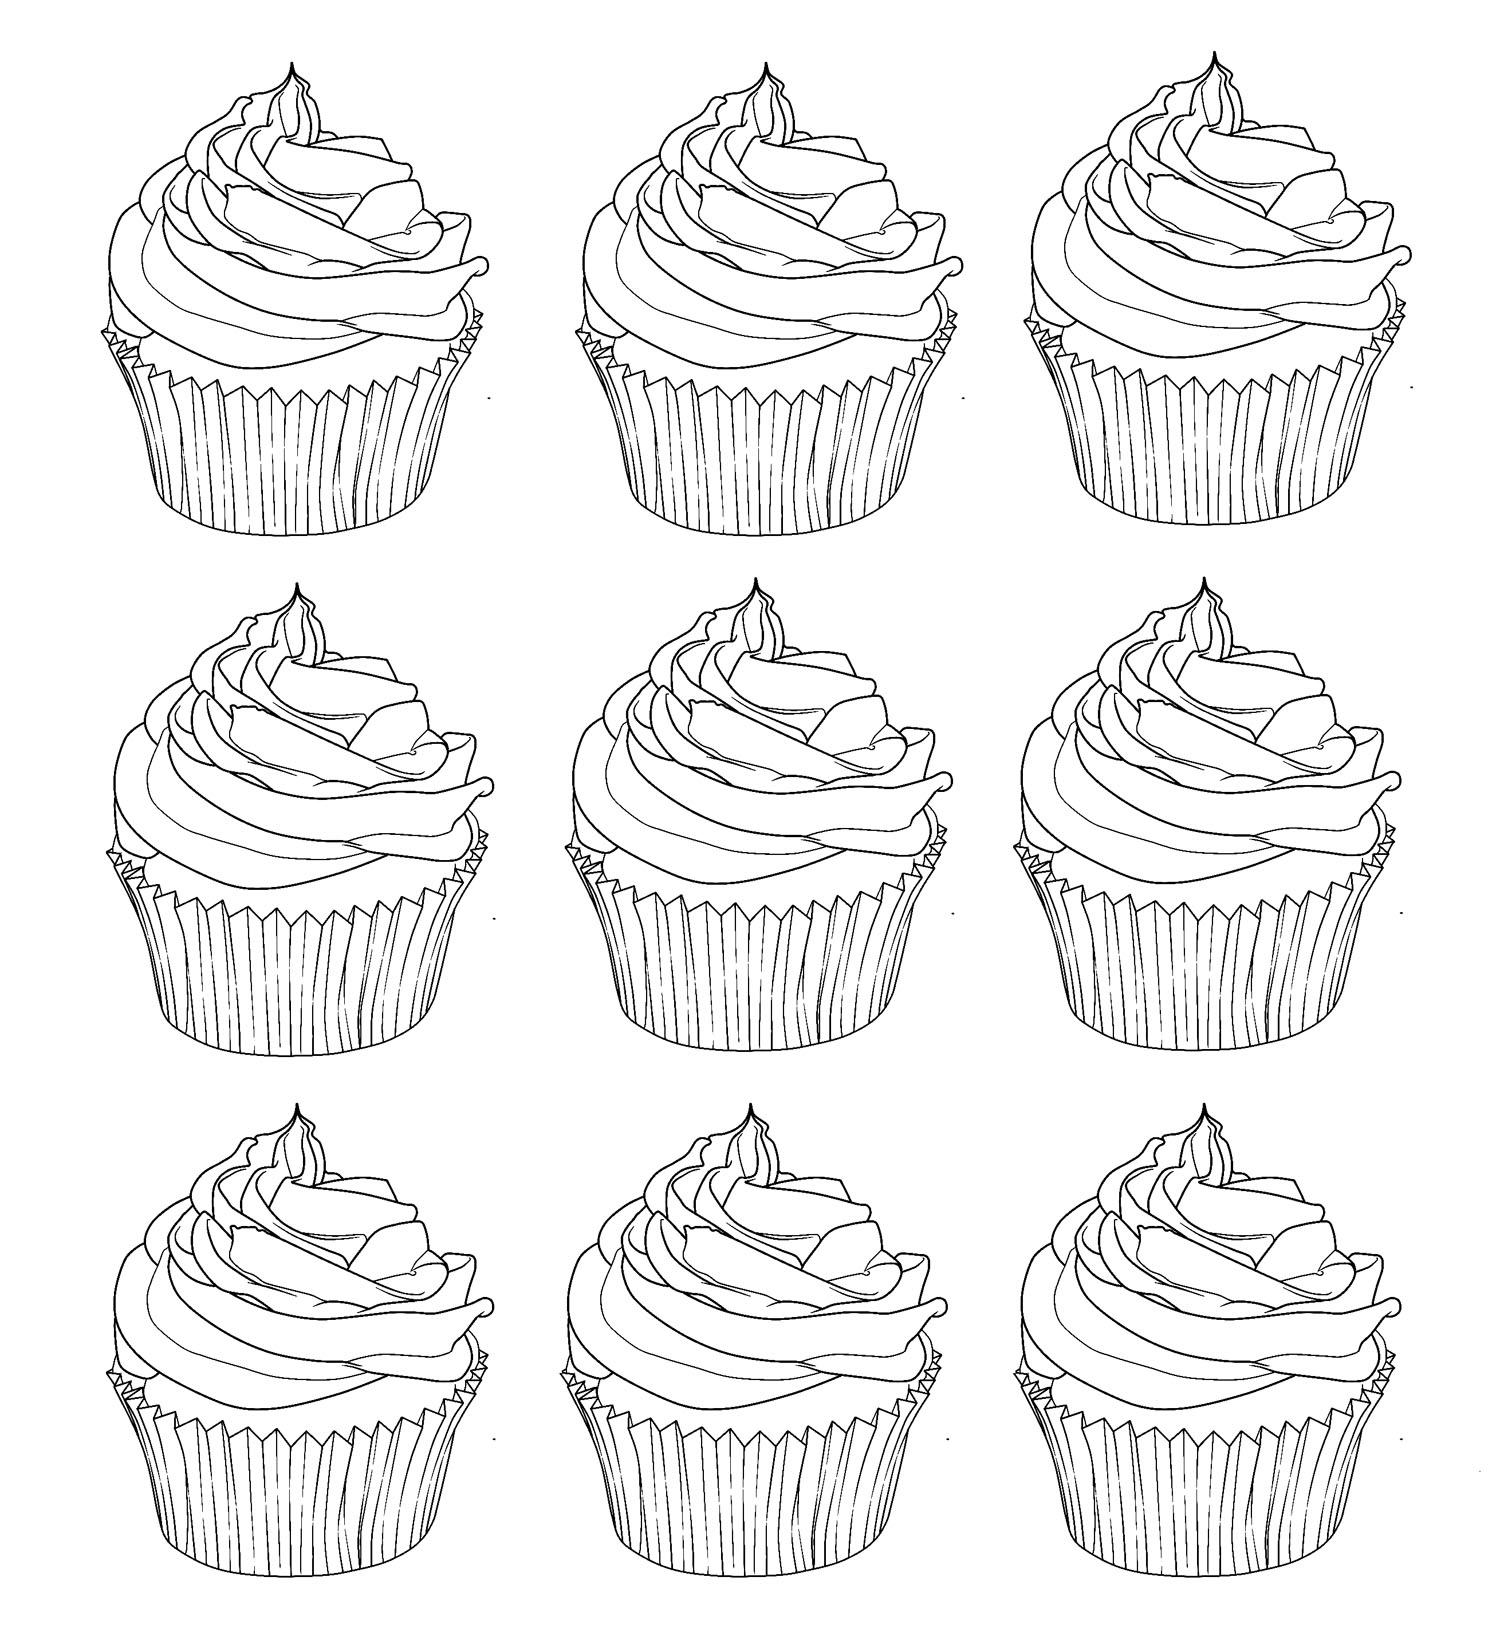 Cupcakes warhol Cupcakes Adult Coloring Pages